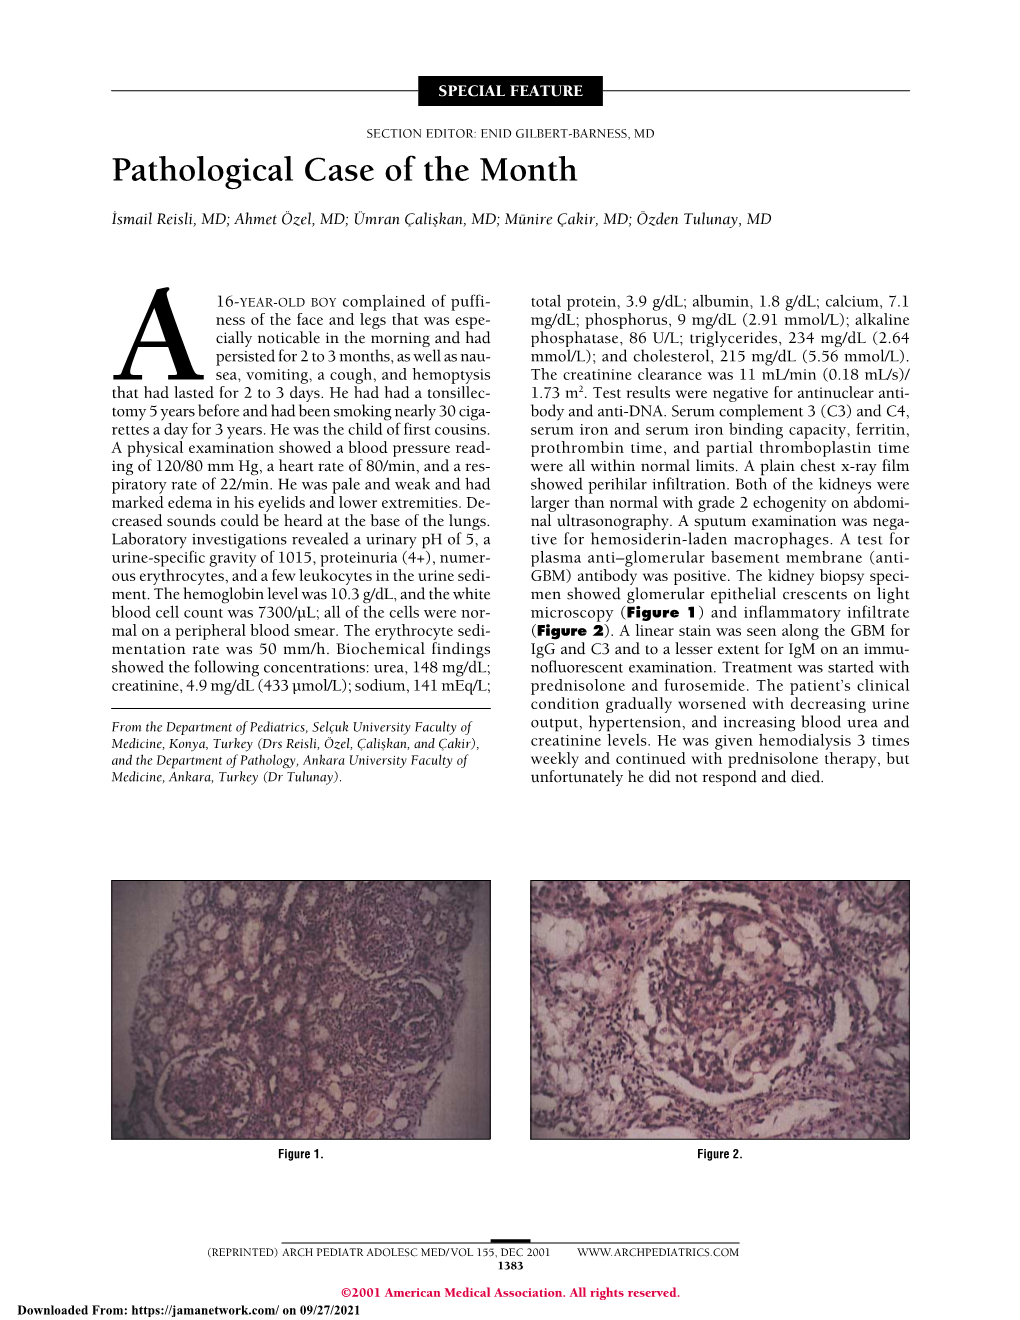 Pathological Case of the Month